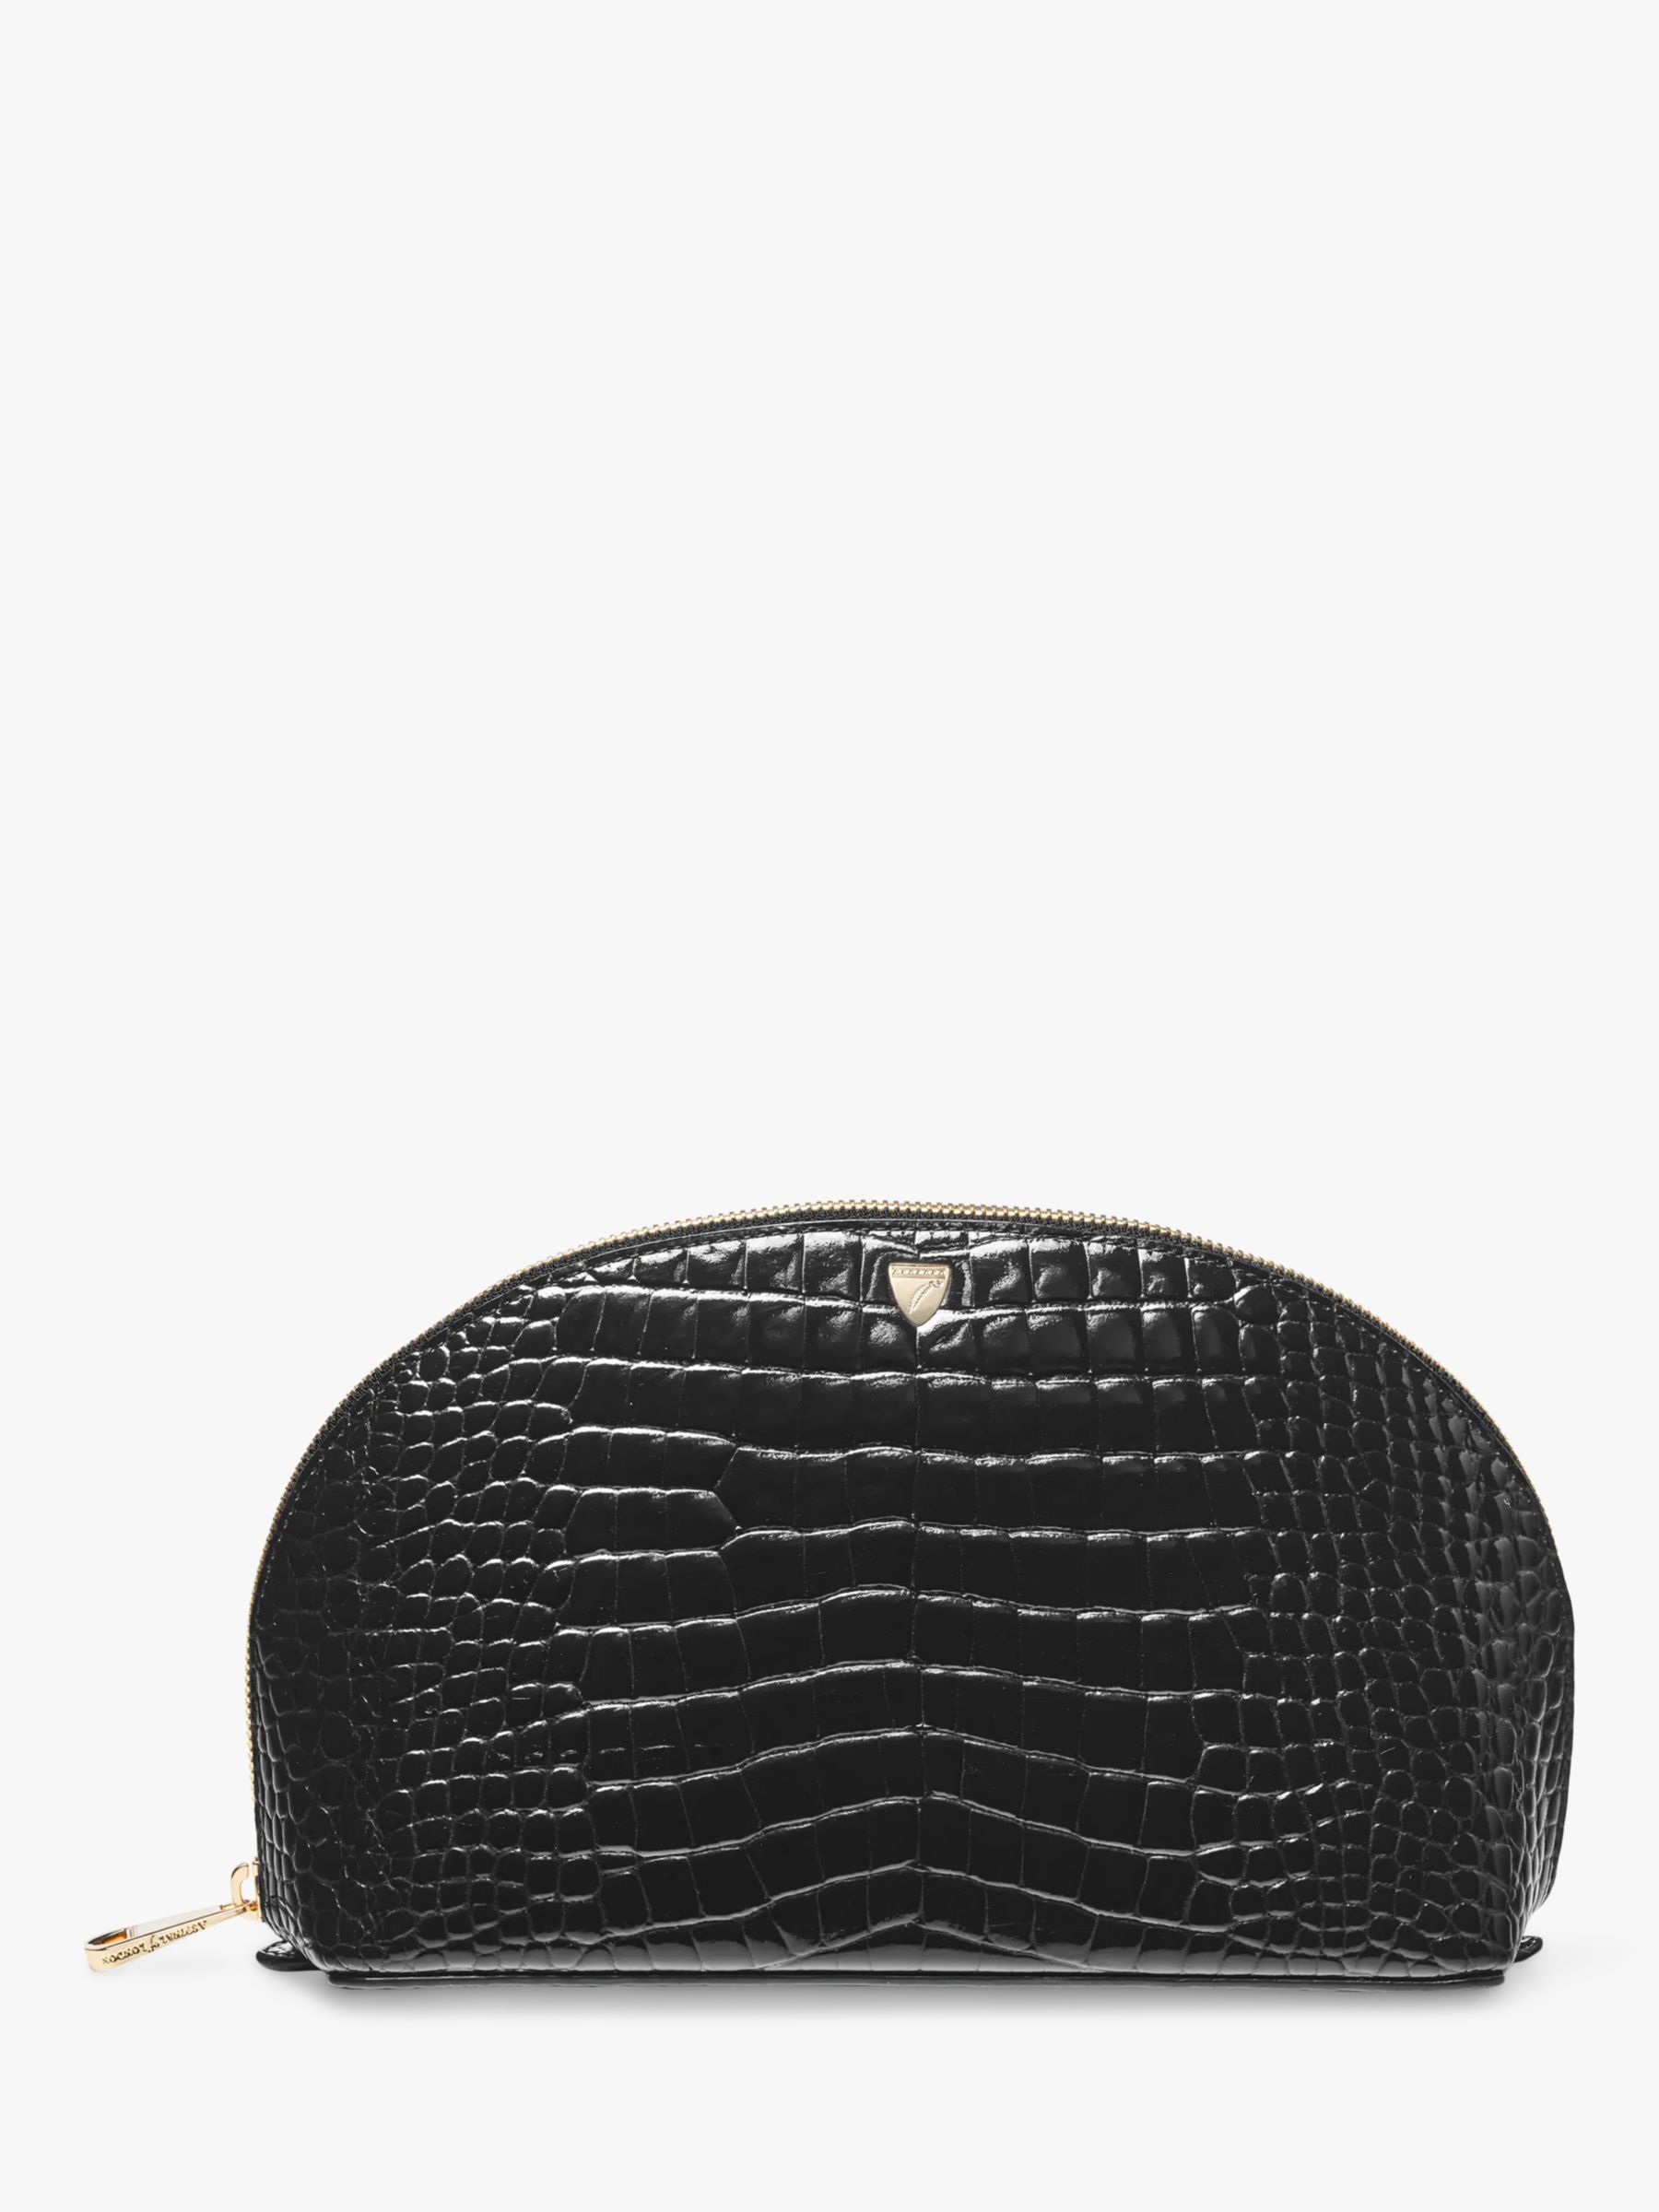 Aspinal of London Large Croc Effect Leather Cosmetic Case, Black 1